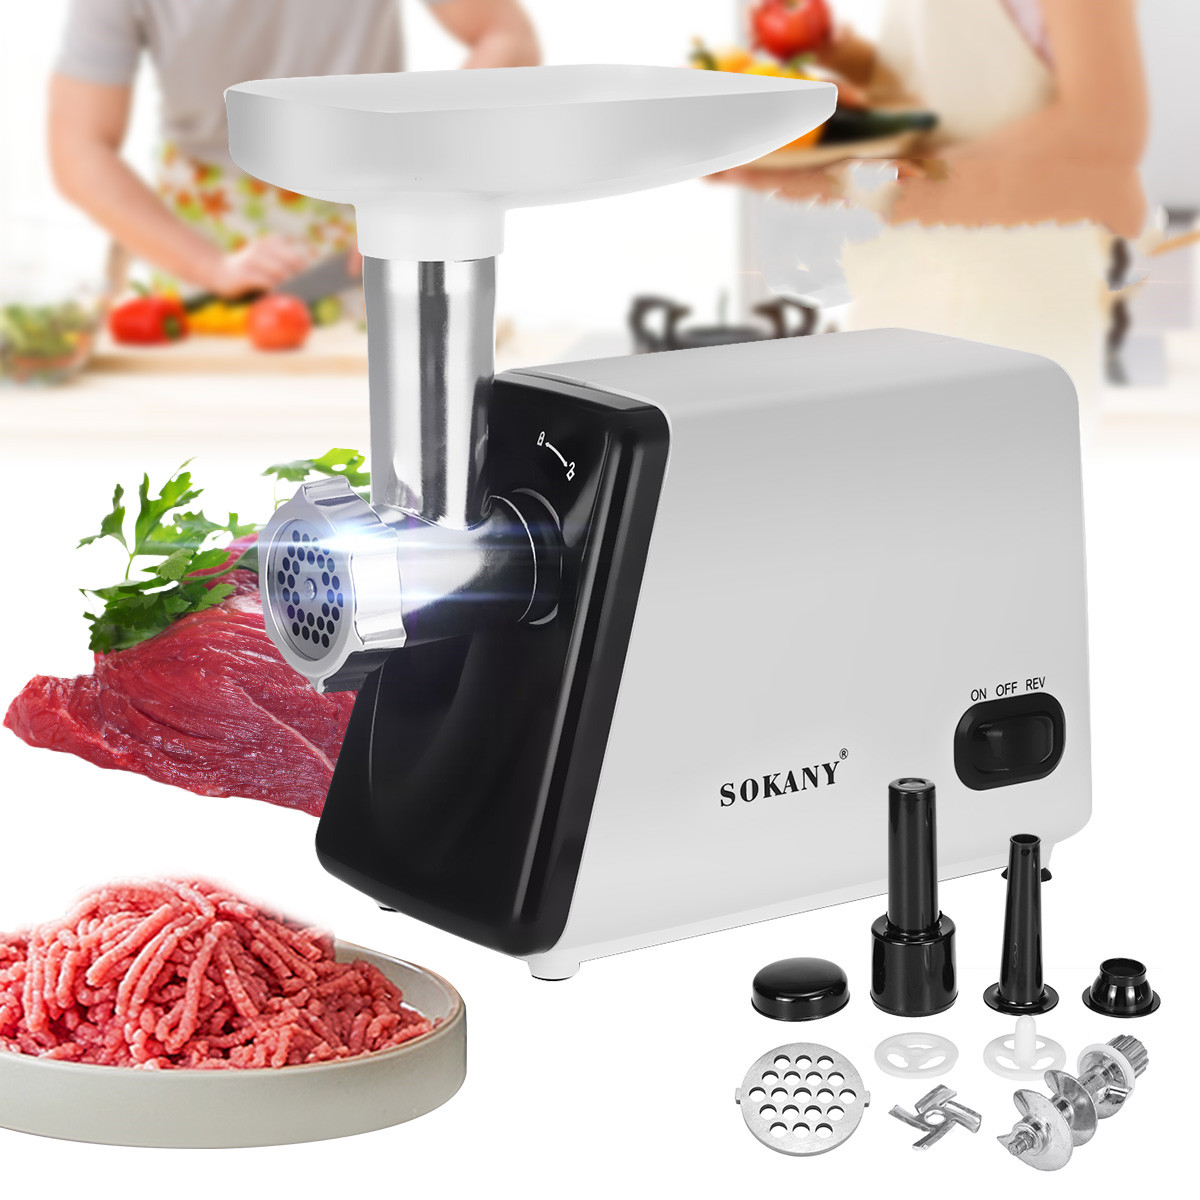 1PCS-SOKANY-110V-Electric-Household-Multifunctional-Stainless-Steel-Stir-Minced-Meat-Machine-Sausage-1902312-14